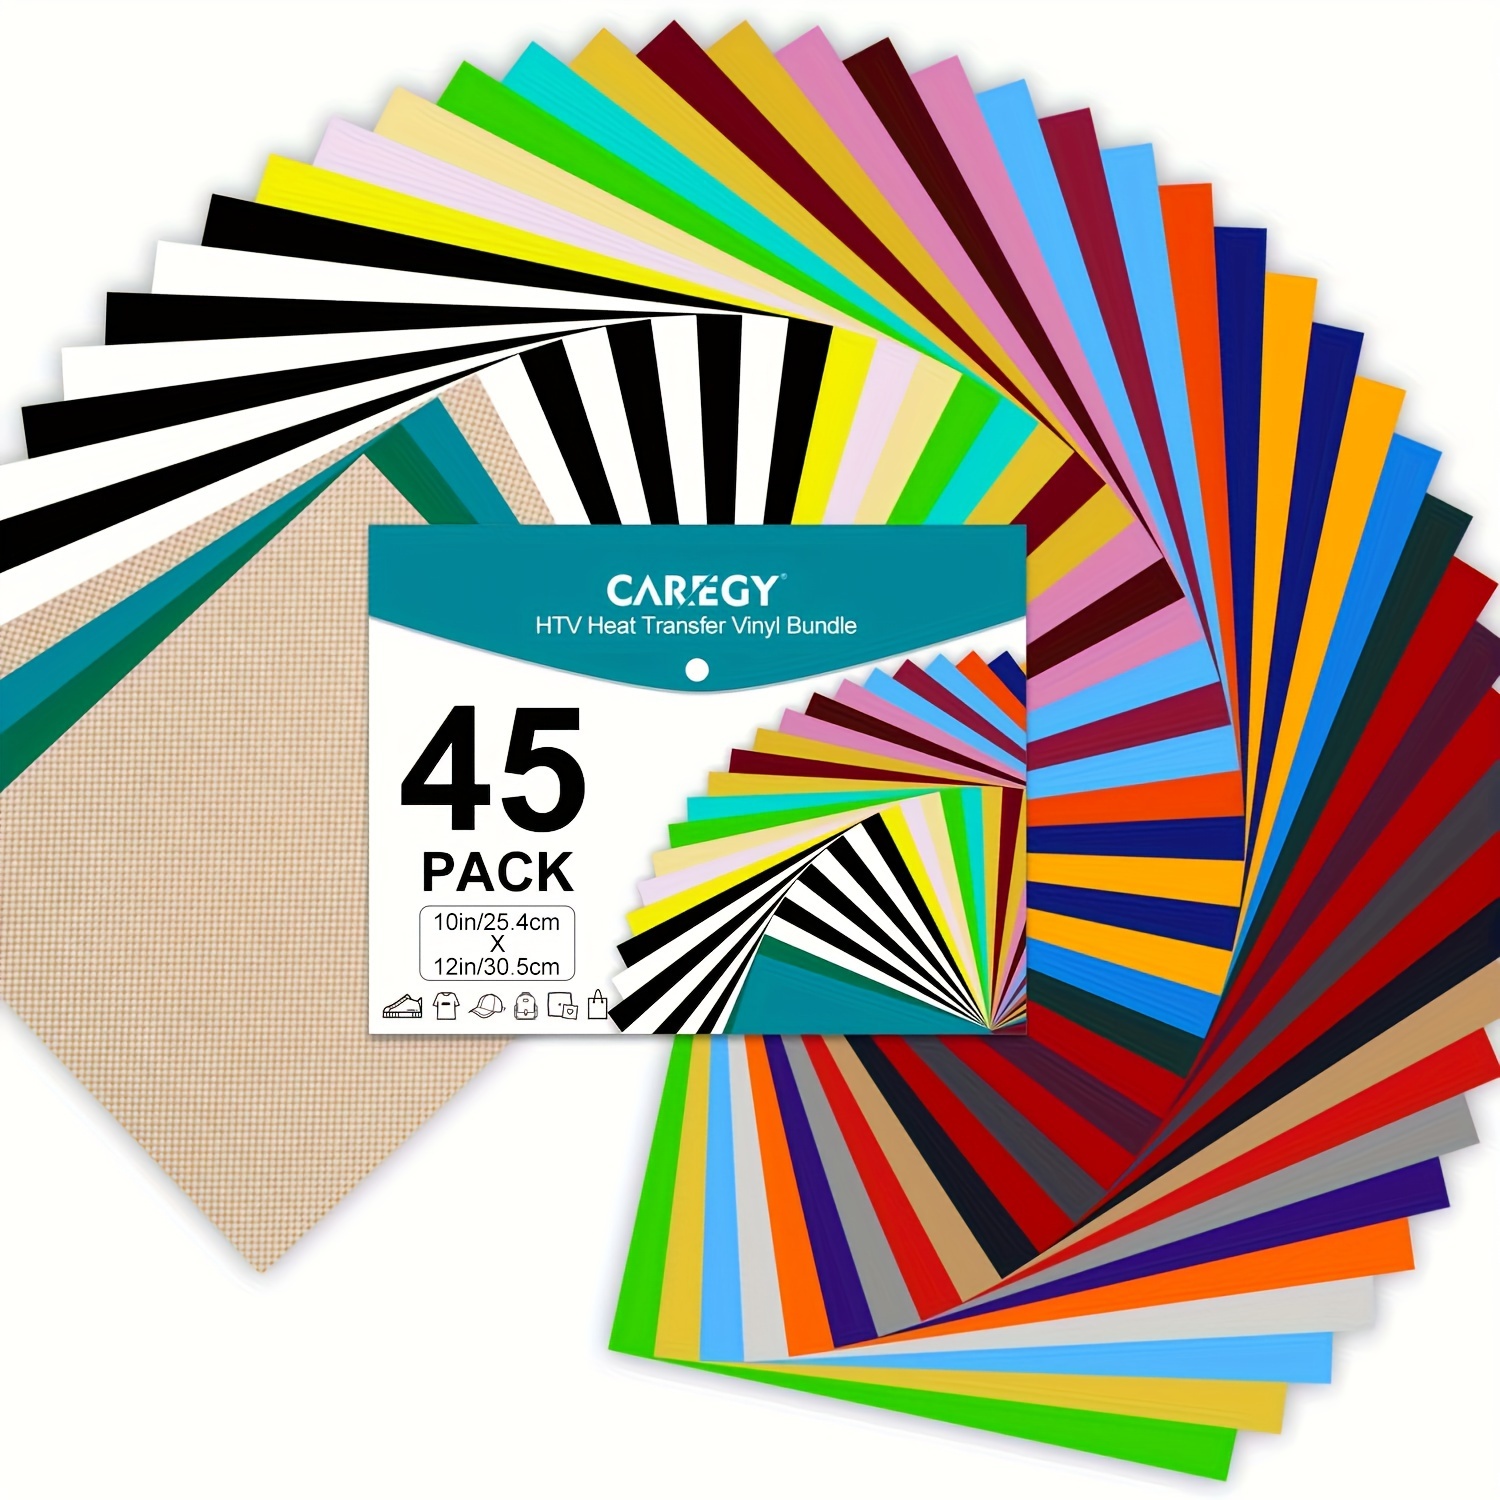 HTVRONT 6 Pack Sensitive to Cold Color Changing Permanent Adhesive Vinyl 12 inch x 10 inch + 2 Transfer Tape Sheets Bundle, Size: 12 x 10